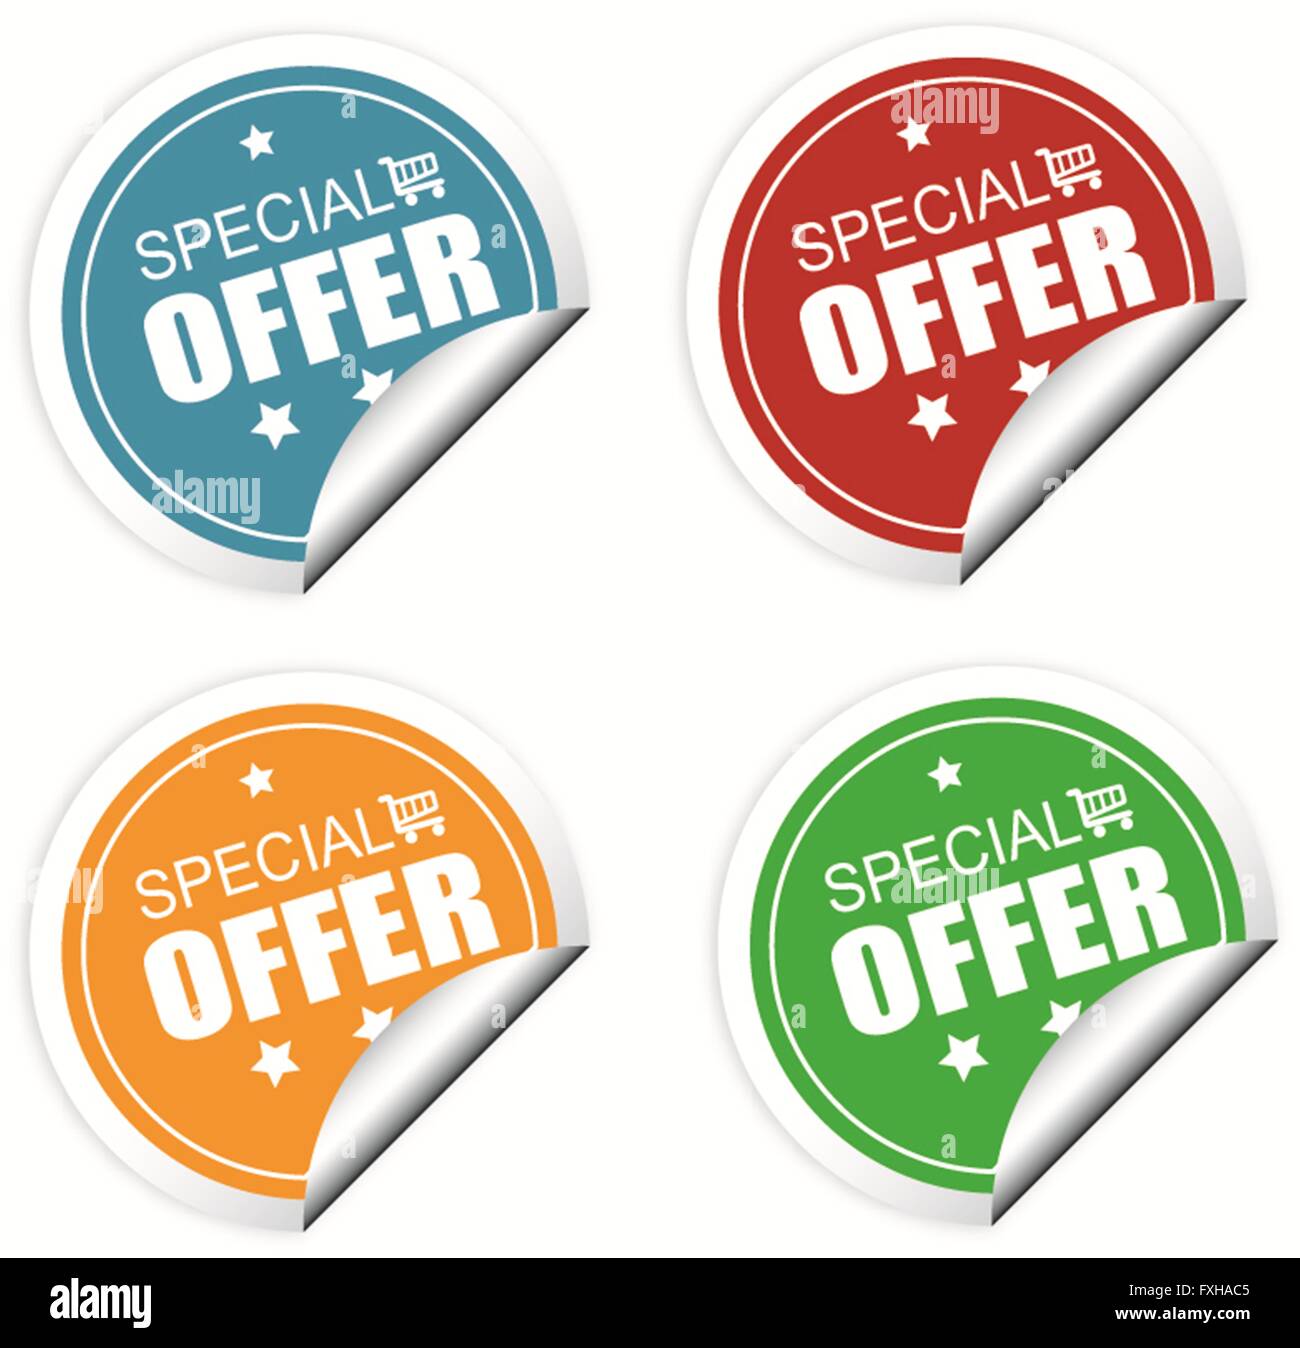 Special offer colorful labels or stickers set Stock Photo